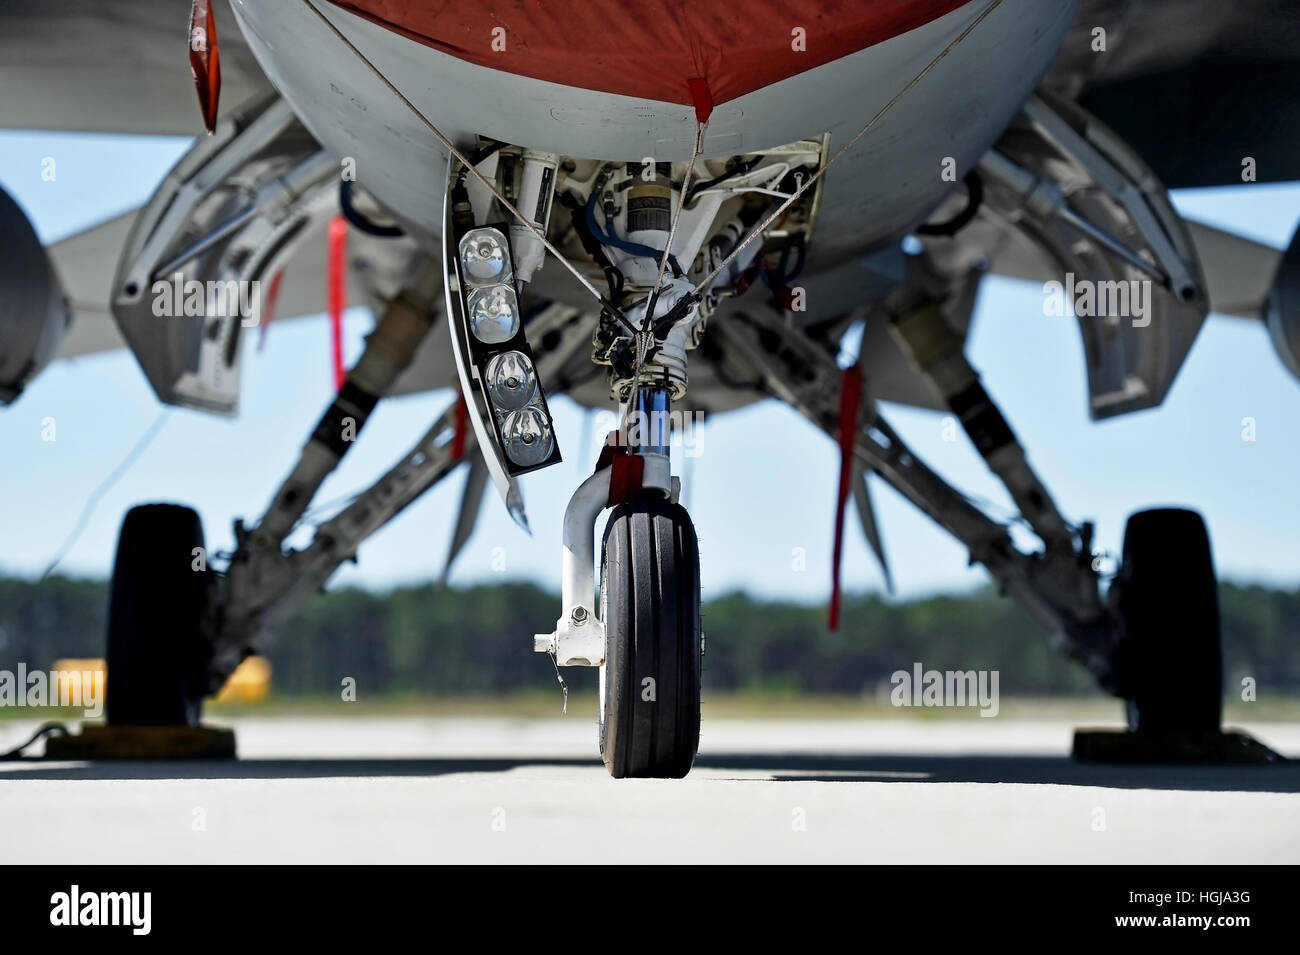 Military aircraft detail with landing gear and engine cover on a runway Stock Photo